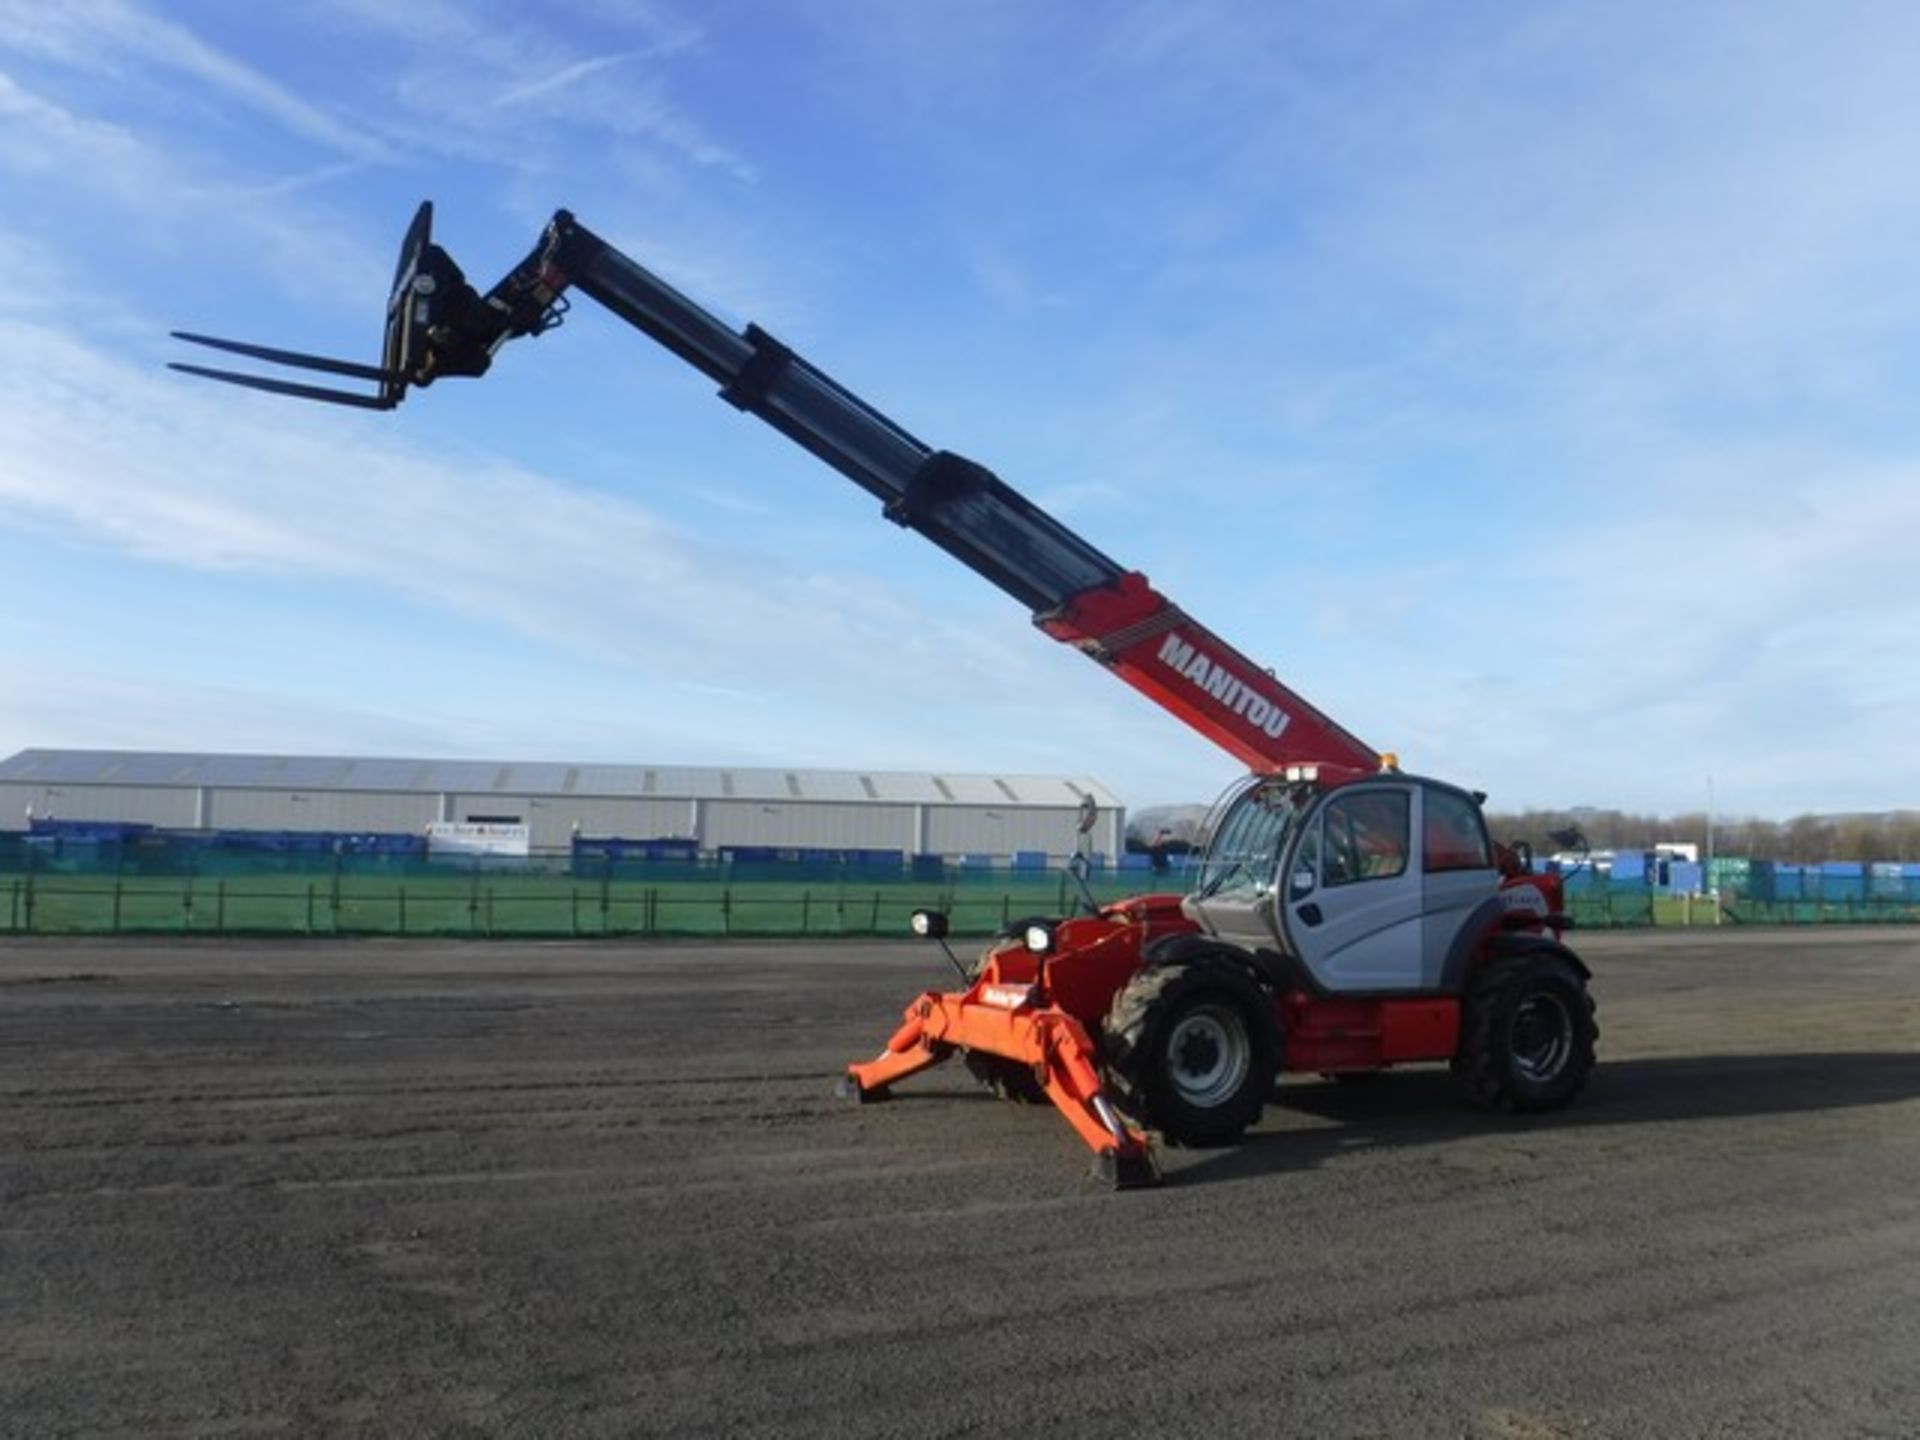 2012 MANITOU MT1840 telehandler c/w pallet forks. CE marked. Lift capacity 4000kg. Max reach 18m. Re